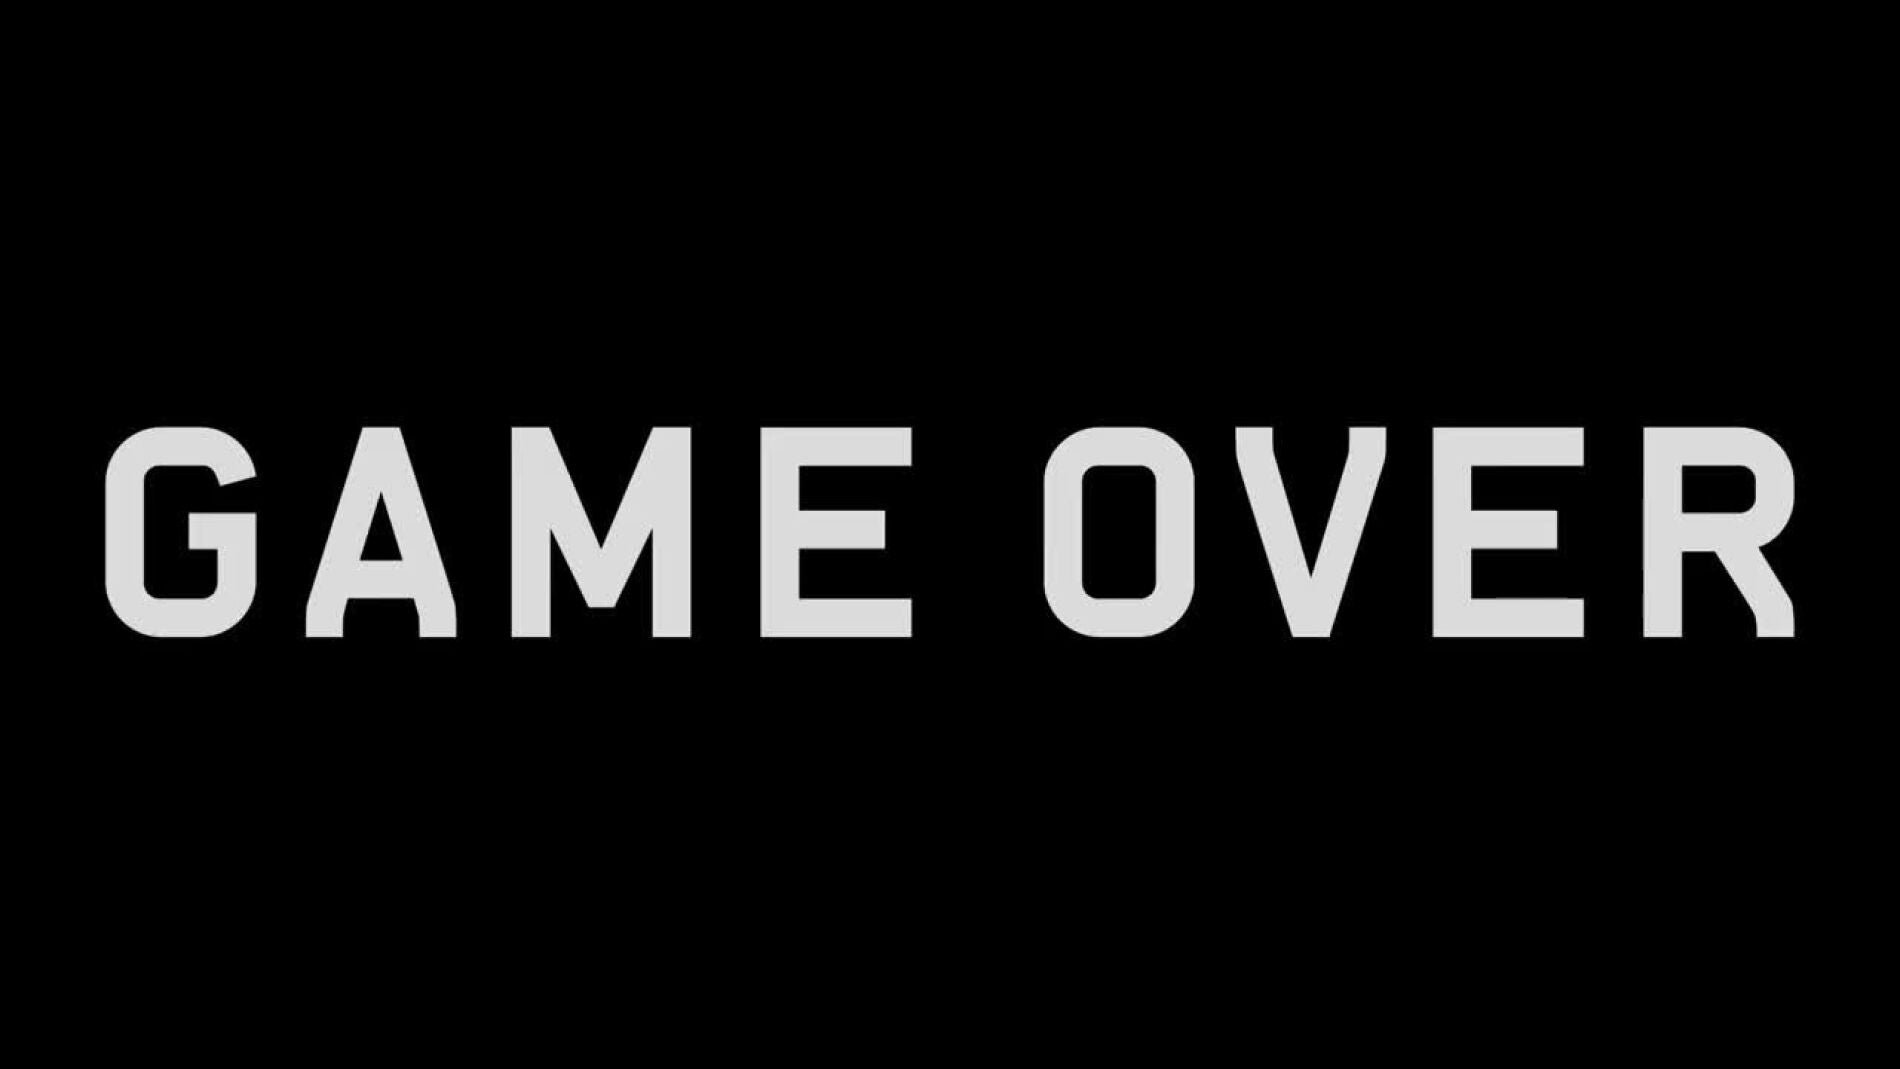 You want these games. Game over. Game over картинка. Надпись game over. Geym OVR.